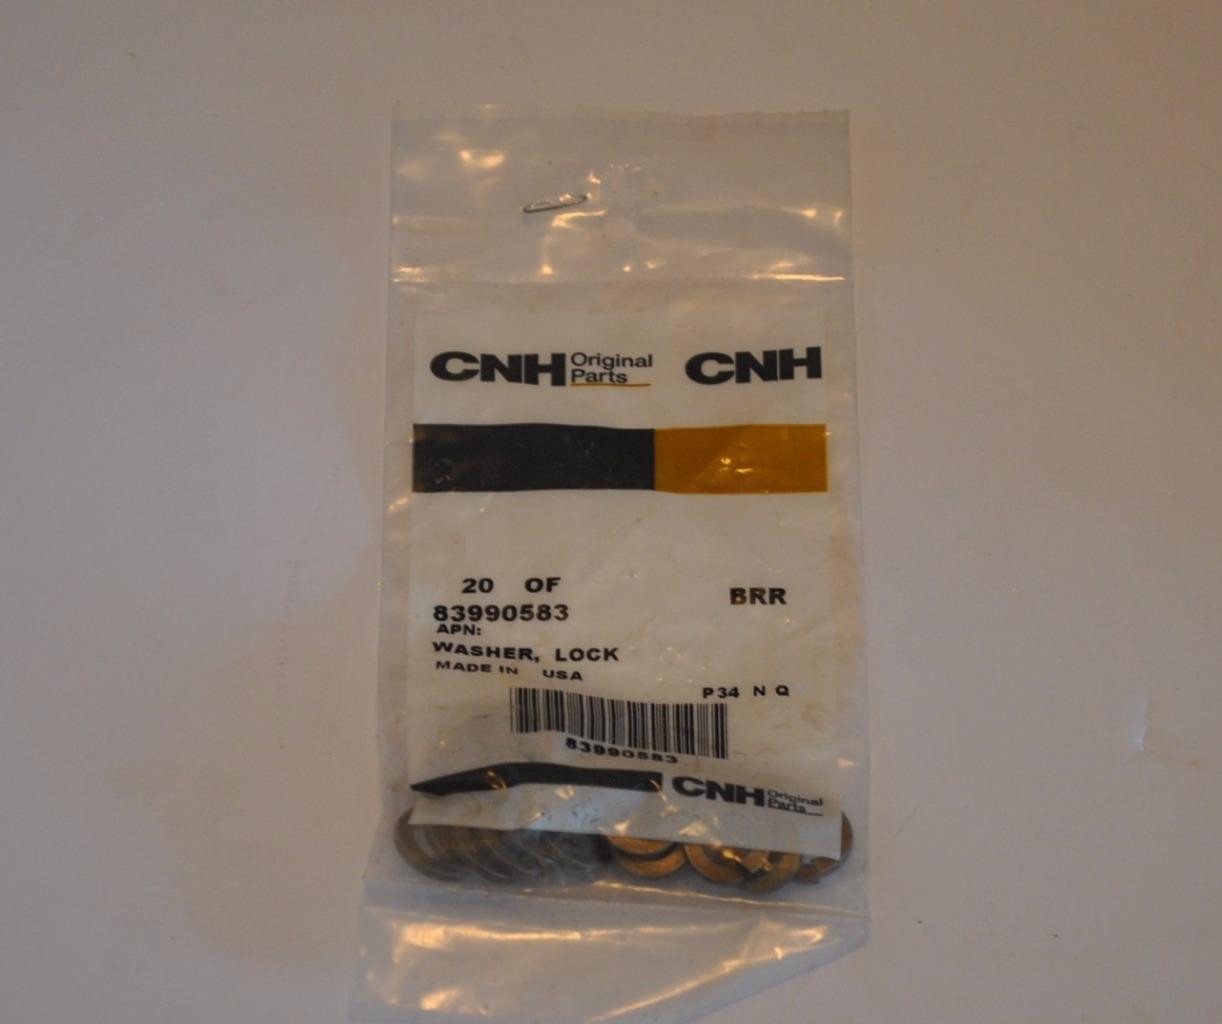 Primary image for CNH Original Parts 83990583 20 pack of Washers